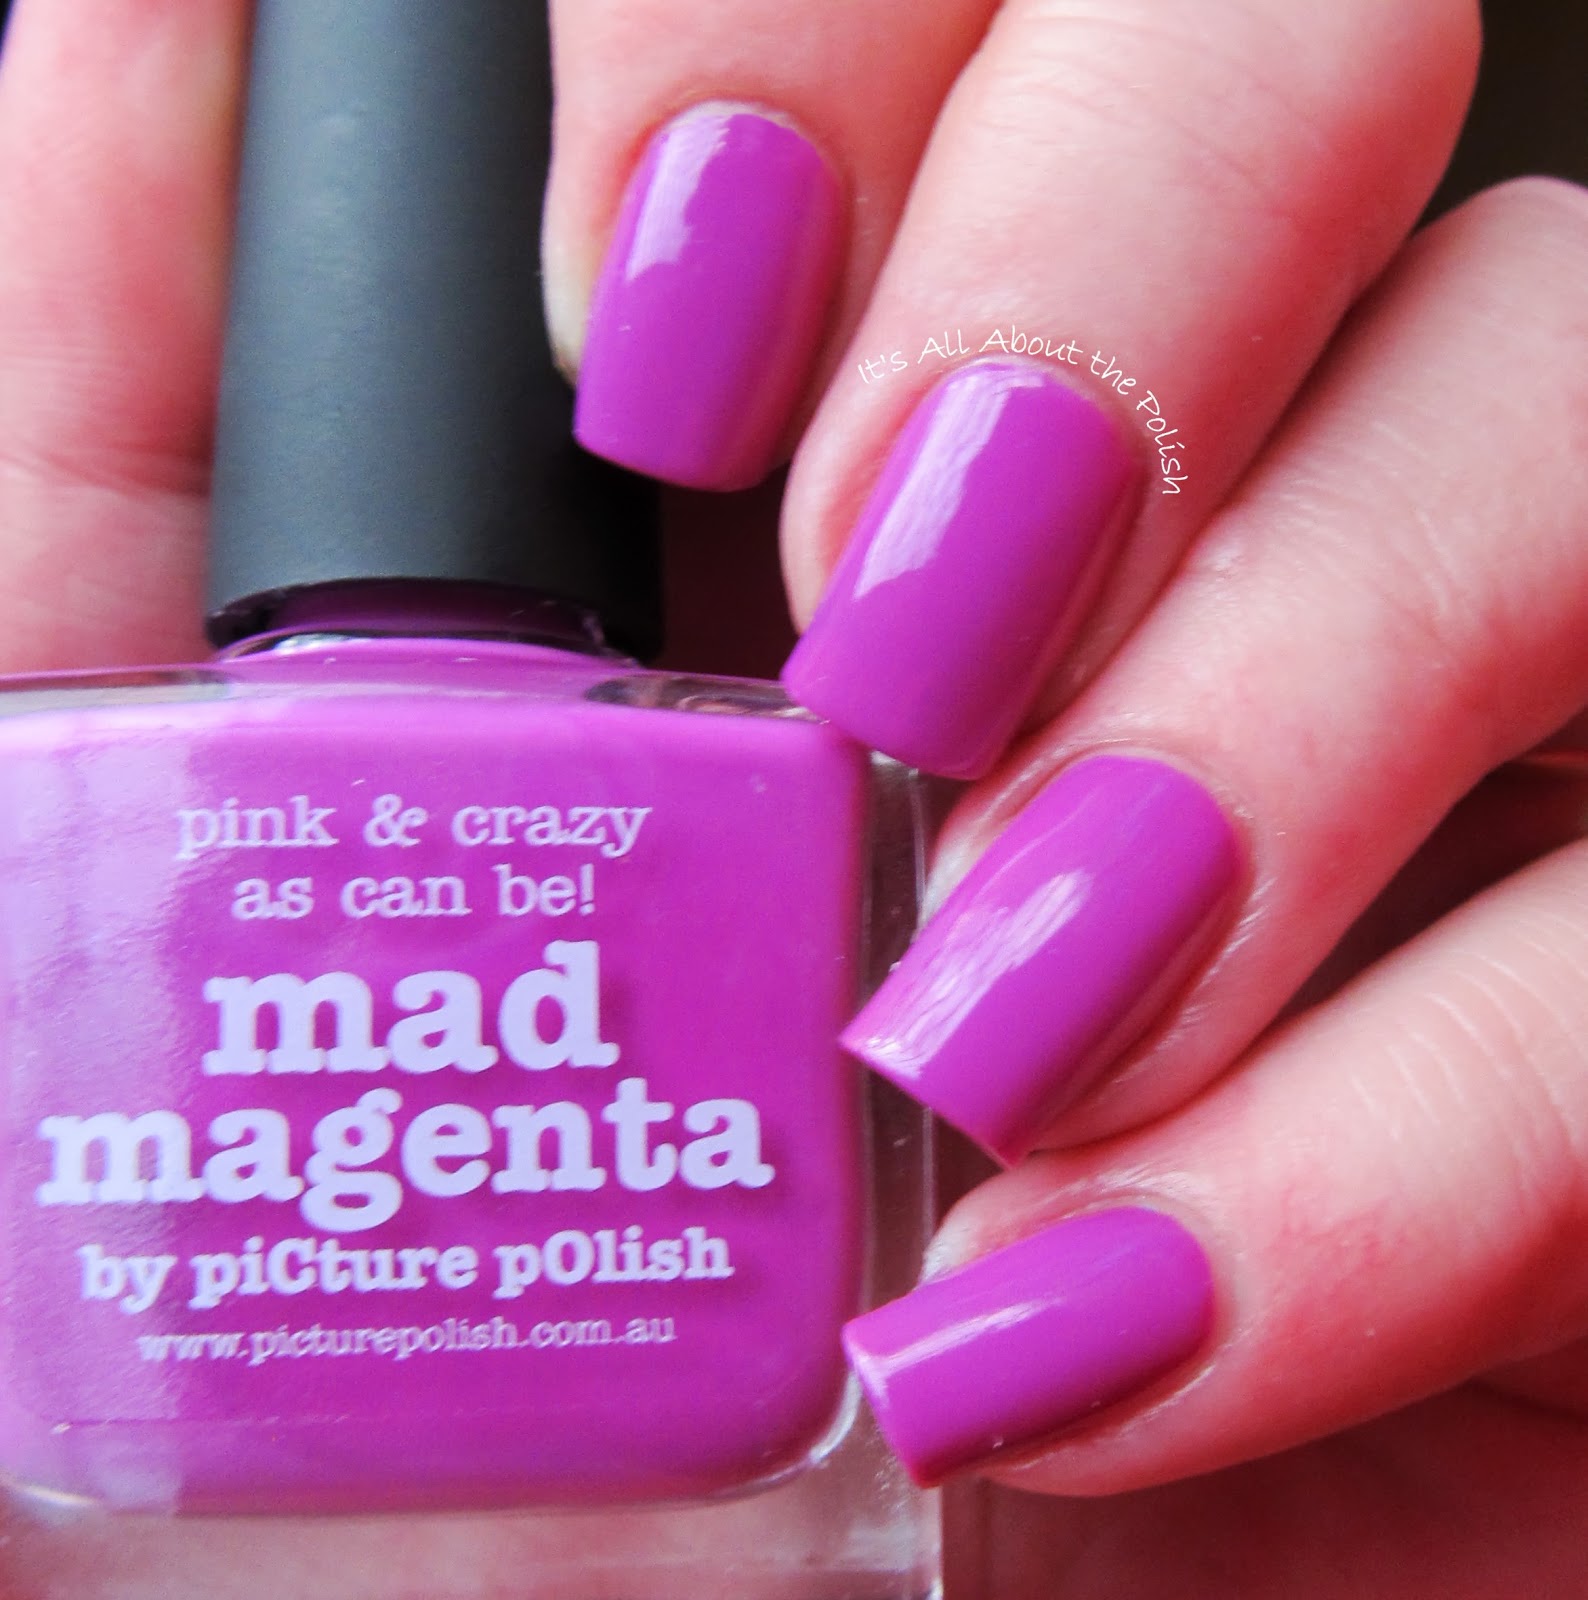 It's all about the polish: piCture pOlish - Mad Magenta